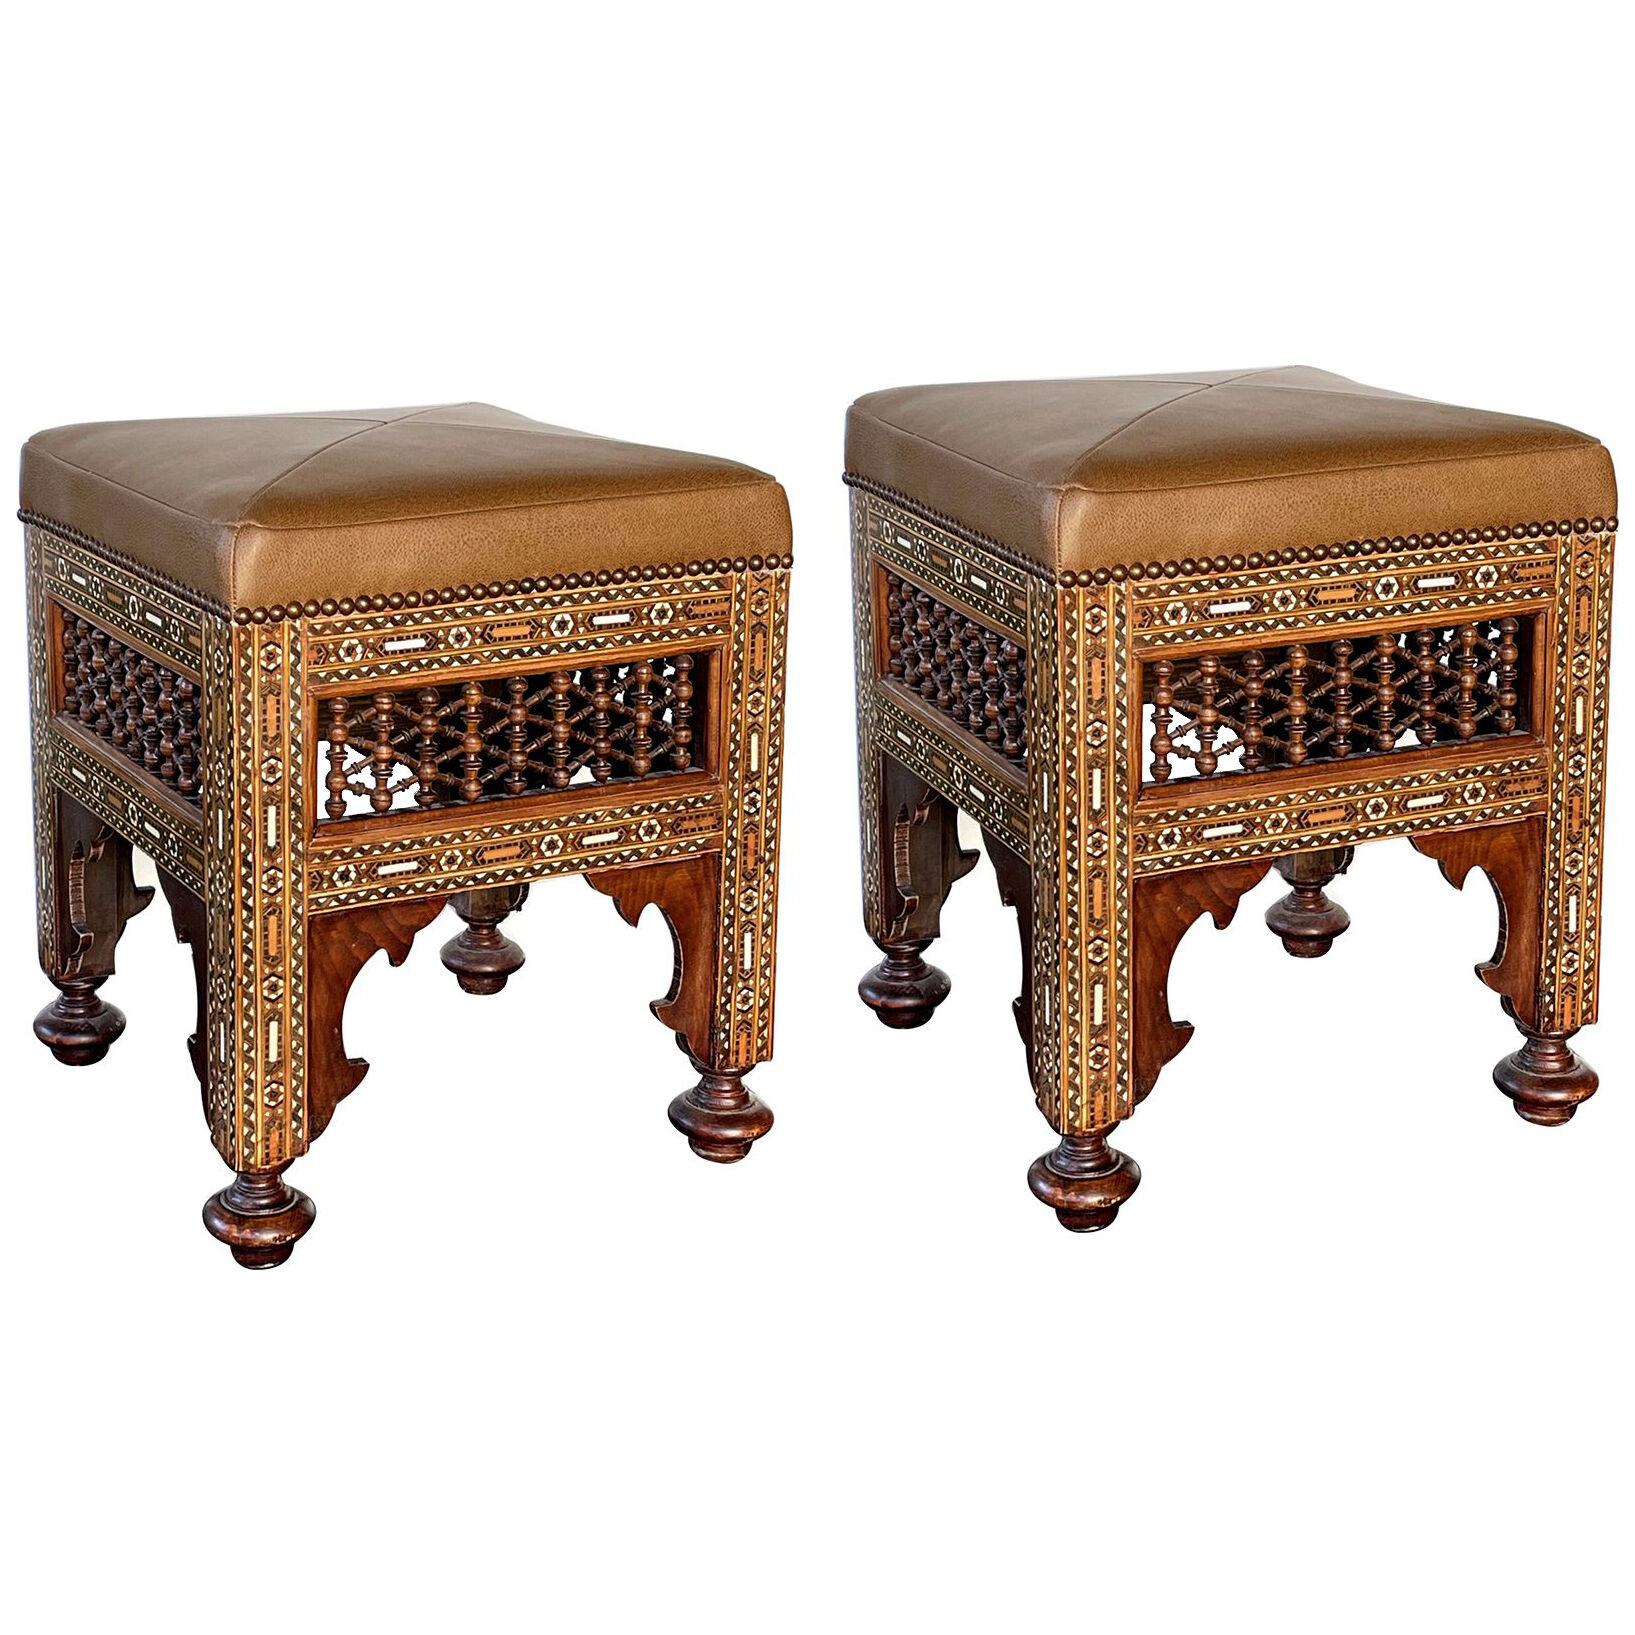 Good pair of Moroccan carved and inlaid square leather upholstered stools